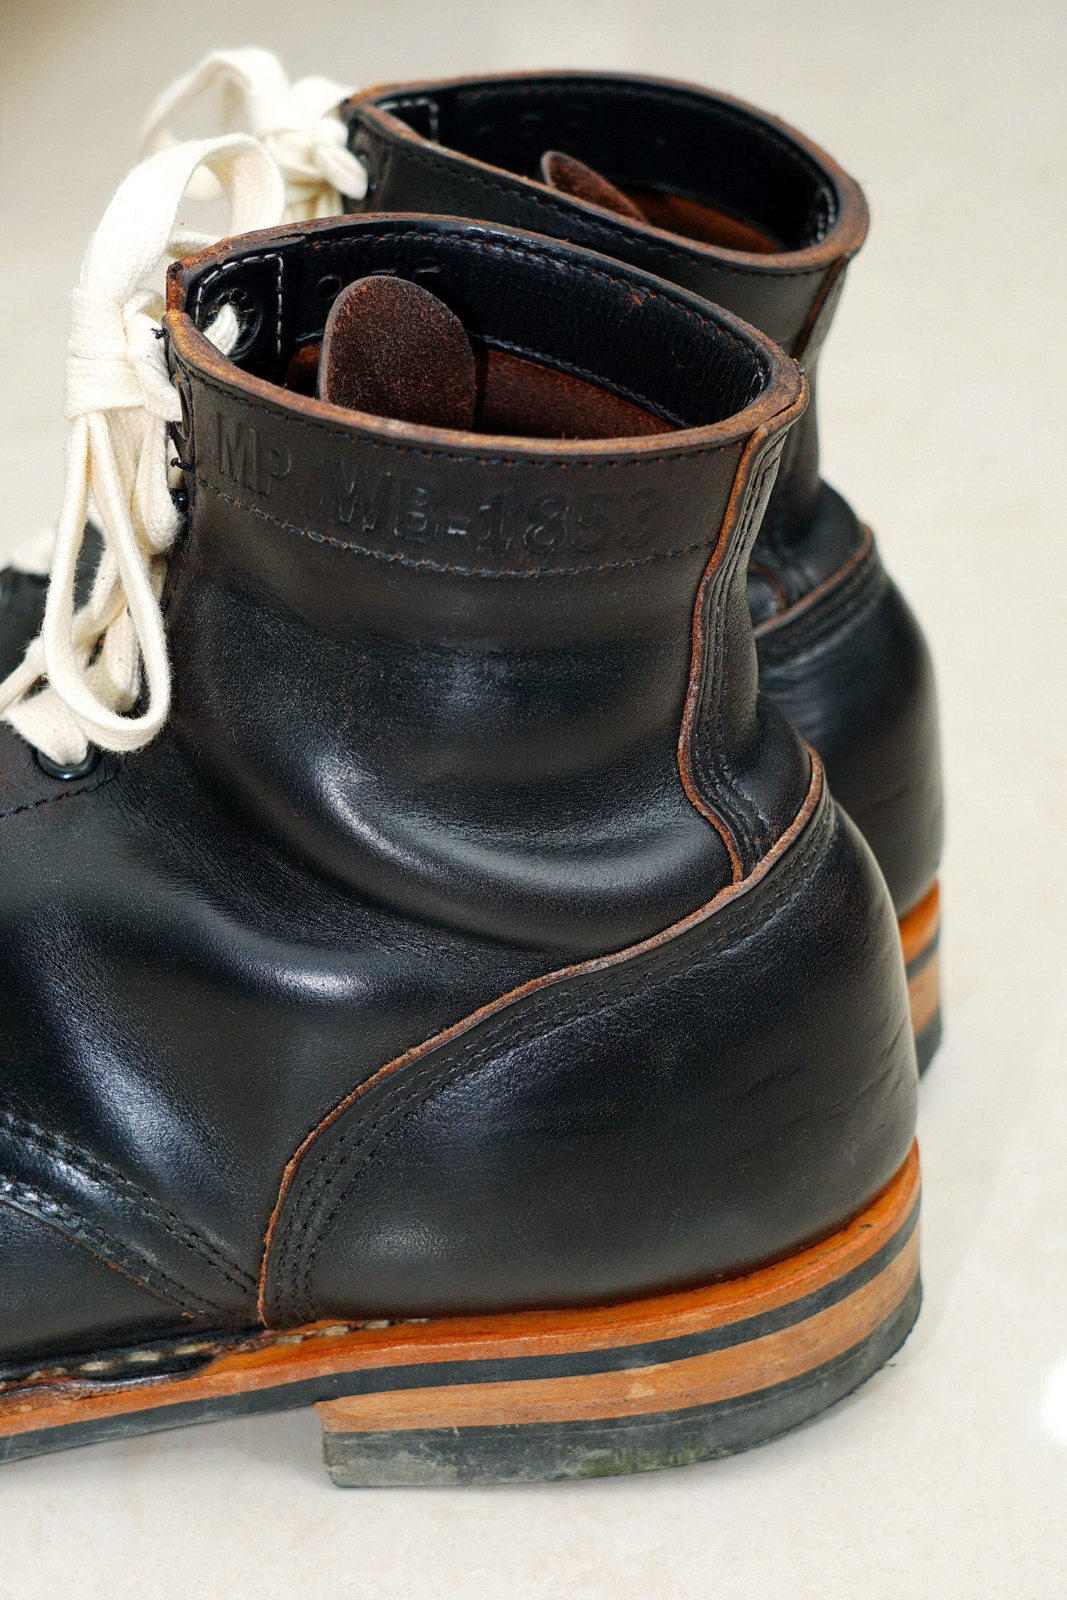 White's MP Service Boots 5Inches Horween CXL BLK 軍警靴，鞋跟特寫1